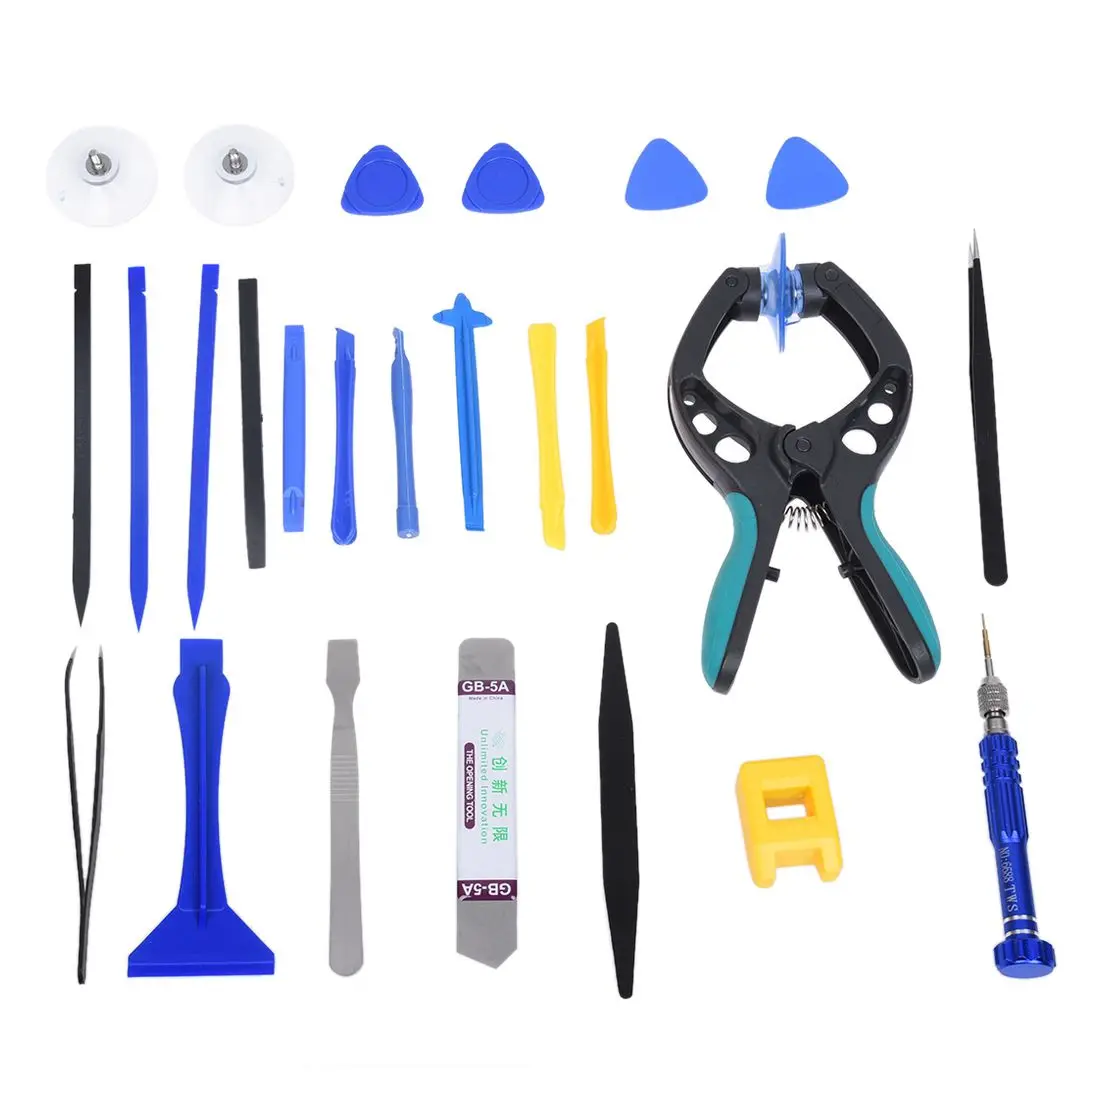 Professional Mobile Phone Repair Tools Kit Spudger Pry Opening LCD Screen Tool Screwdriver Set Pliers Suction Cup For iPhone 5 6 |